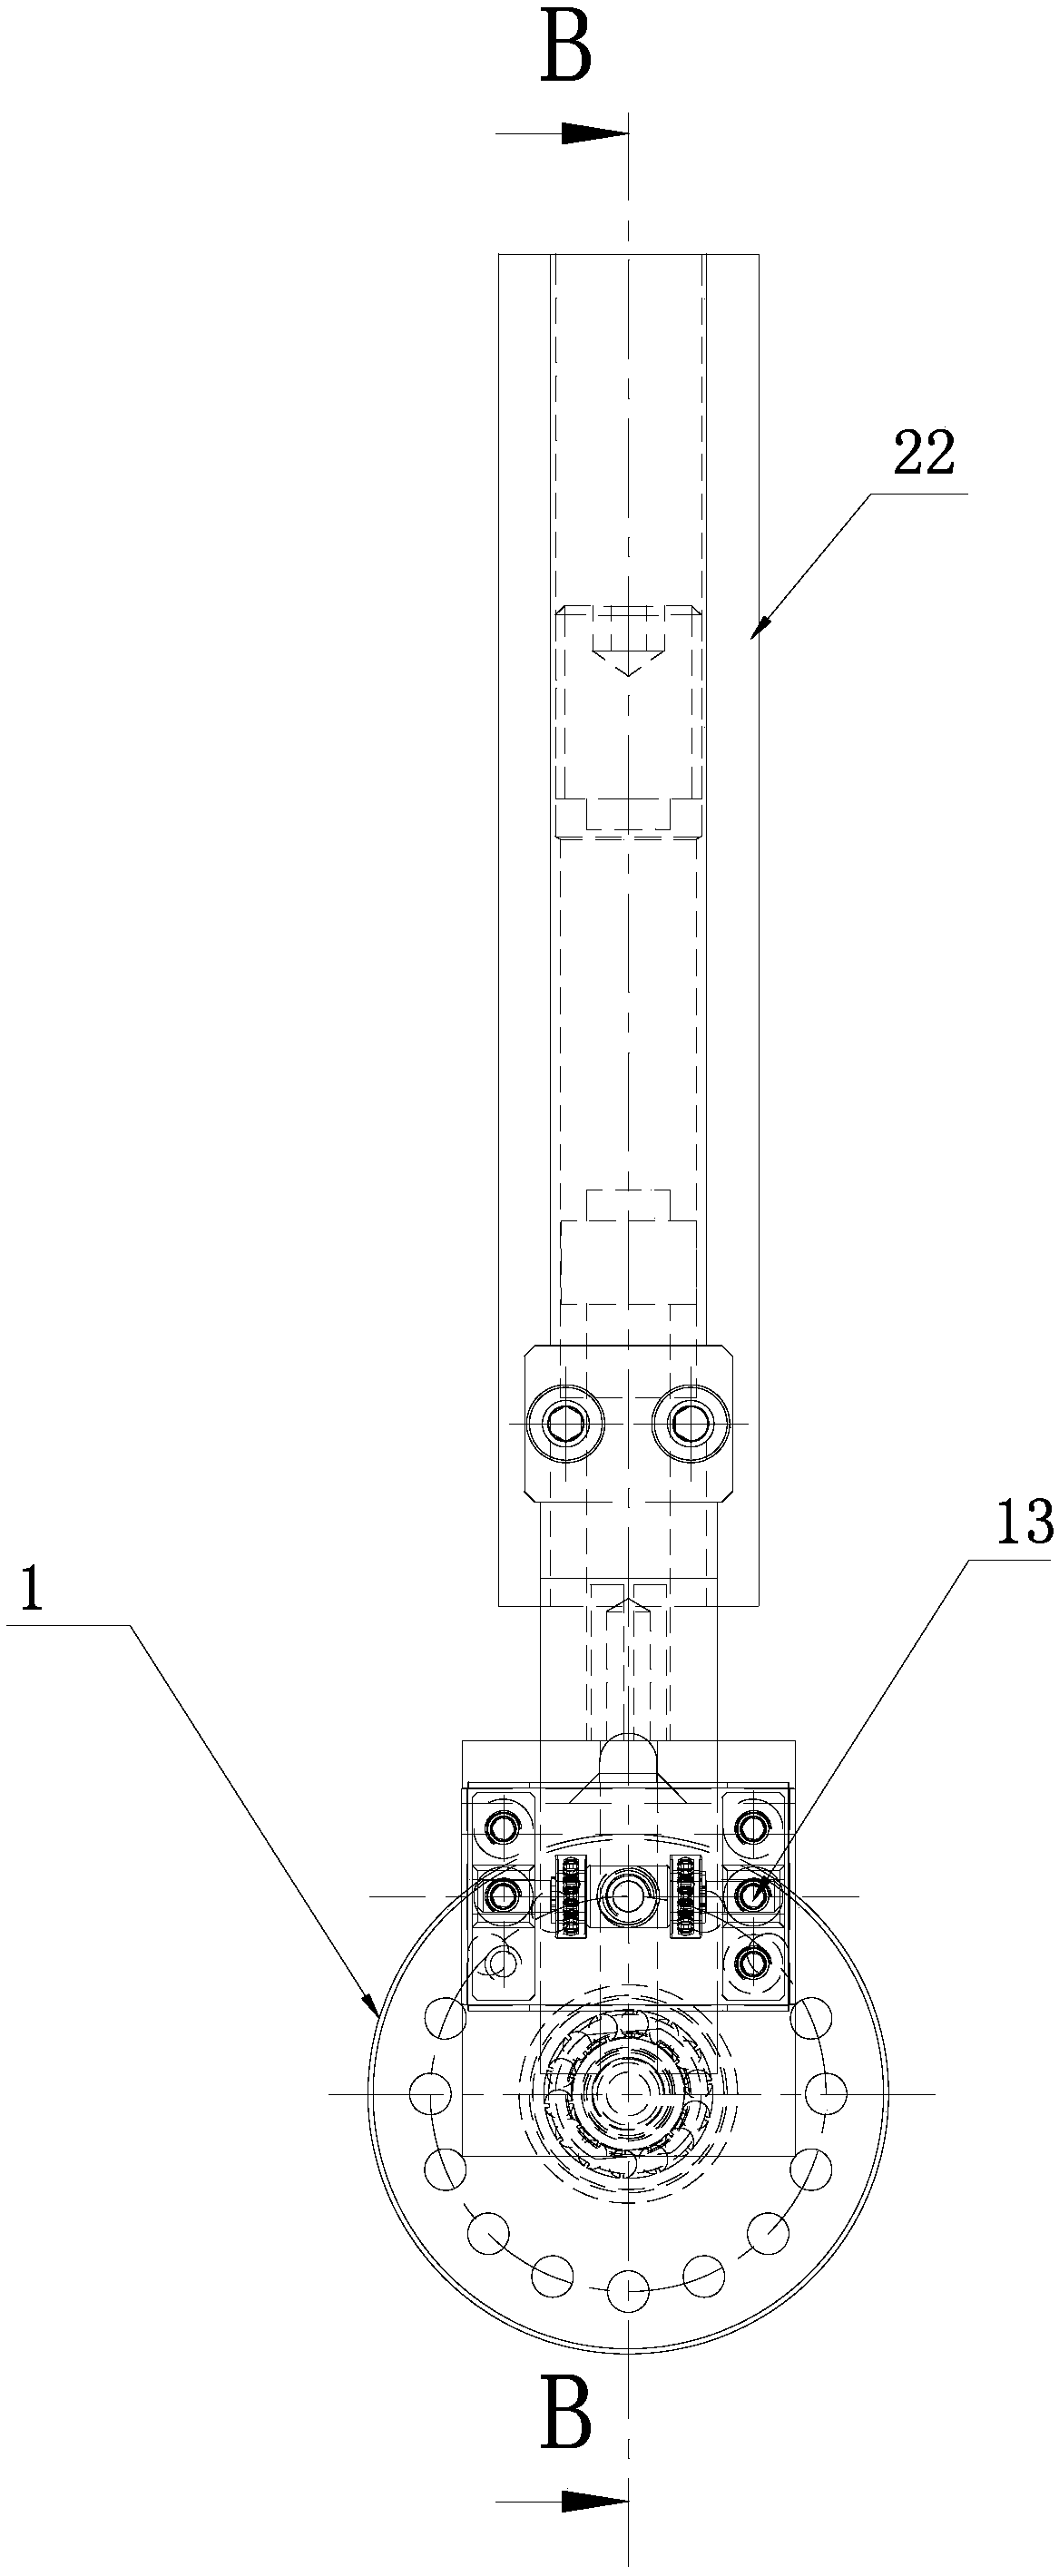 Fixed-pressure rolling tool